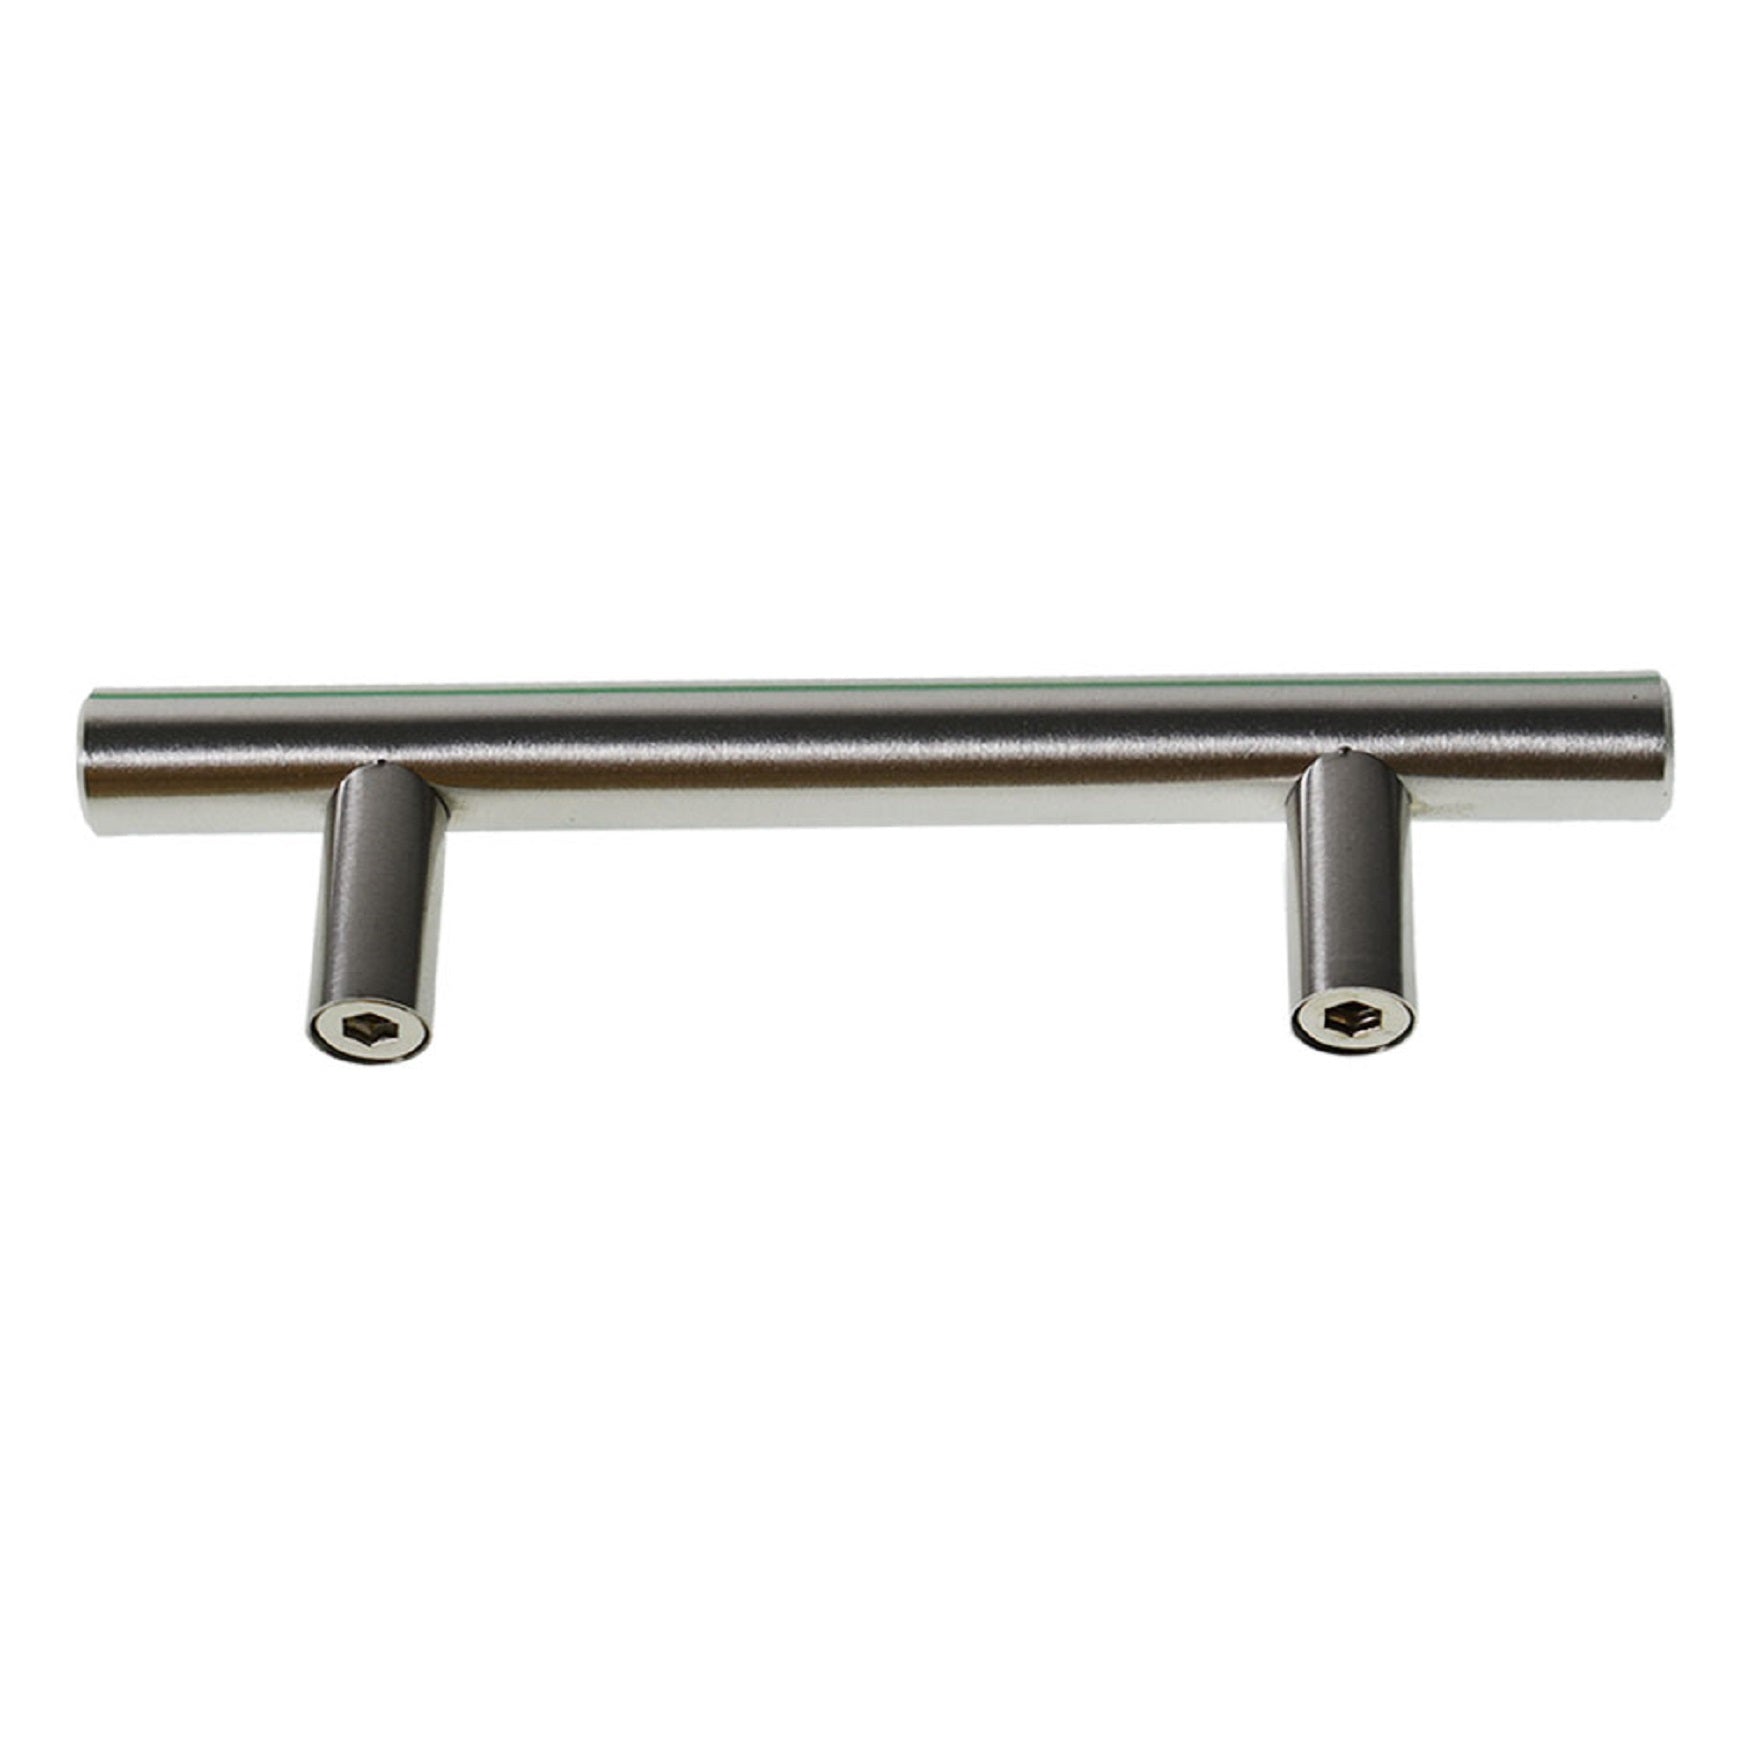 findmall 50 Pack - 5 Inch Cabinet Handle Stainless Steel Drawer Pulls Cabinet Pulls Bar Kitchen Handles 3 Inch Hole Center Strong and Durable FINDMALLPARTS